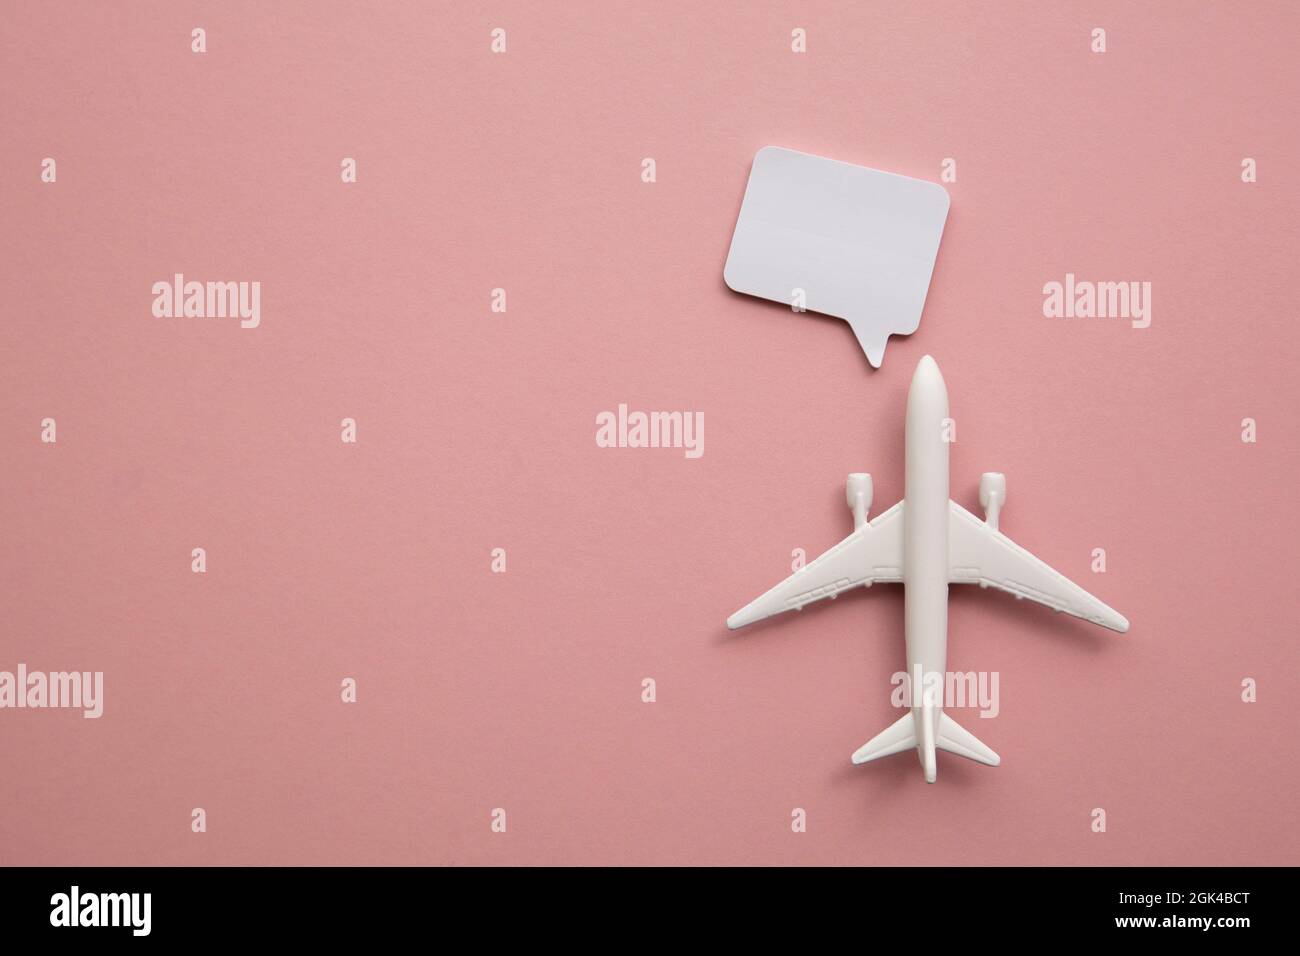 Airplane with a blank speech bubble. Flight feedback and holiday communication background Stock Photo